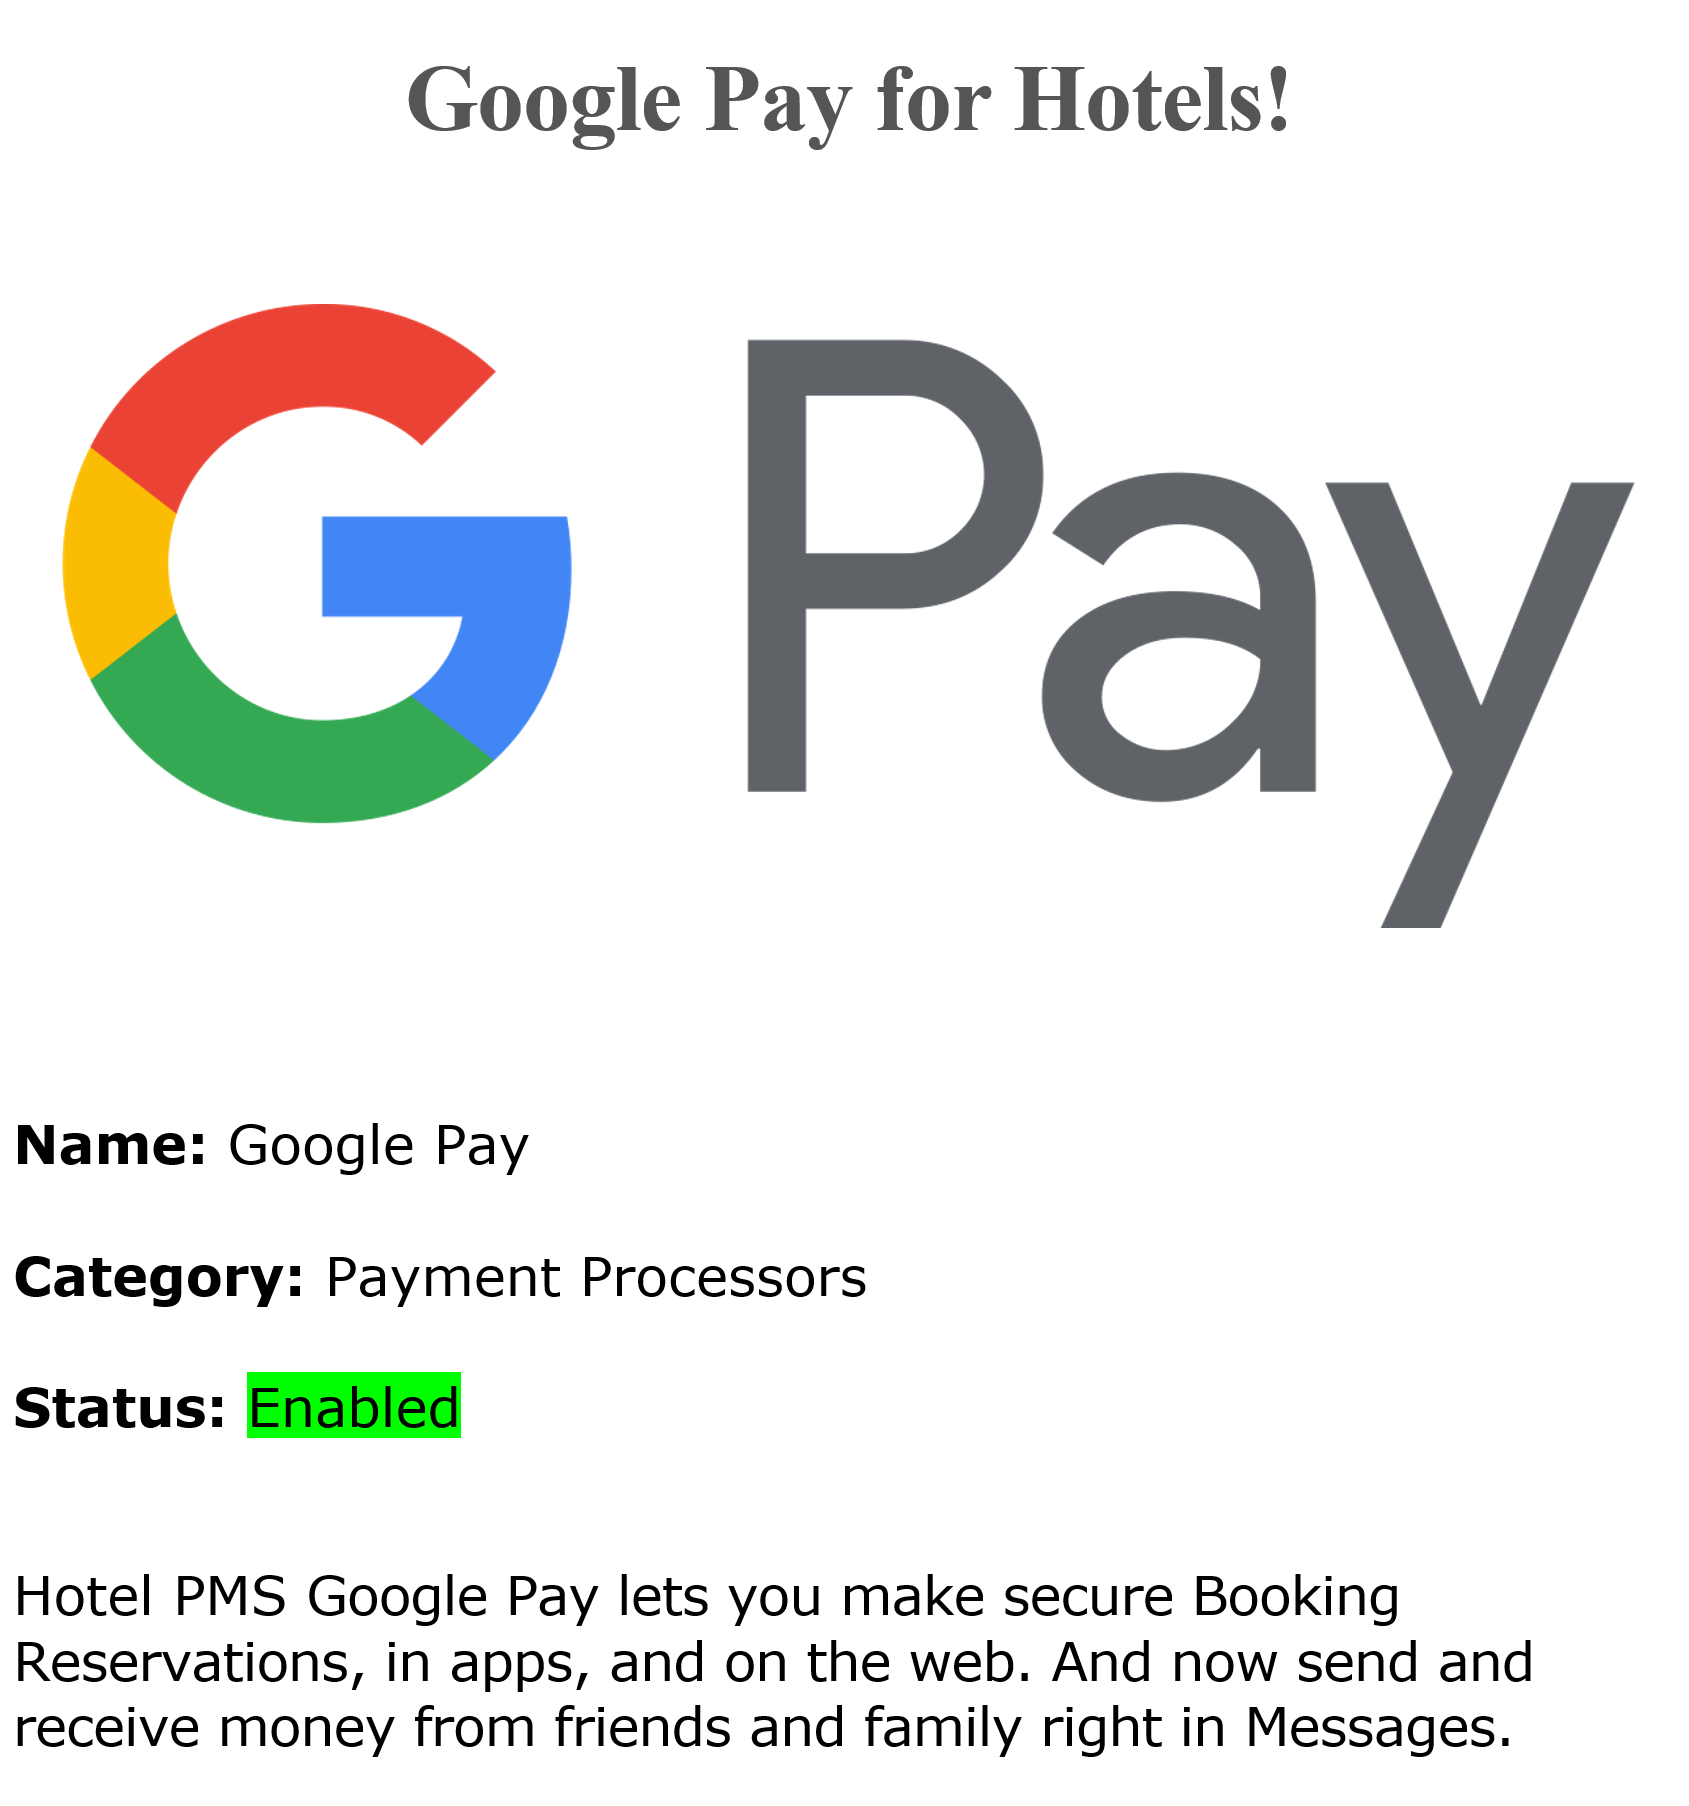 Google Pay Credit Cards Payments Processing | Android Google Pay Credit Cards Payments Processing for hotels and b&b